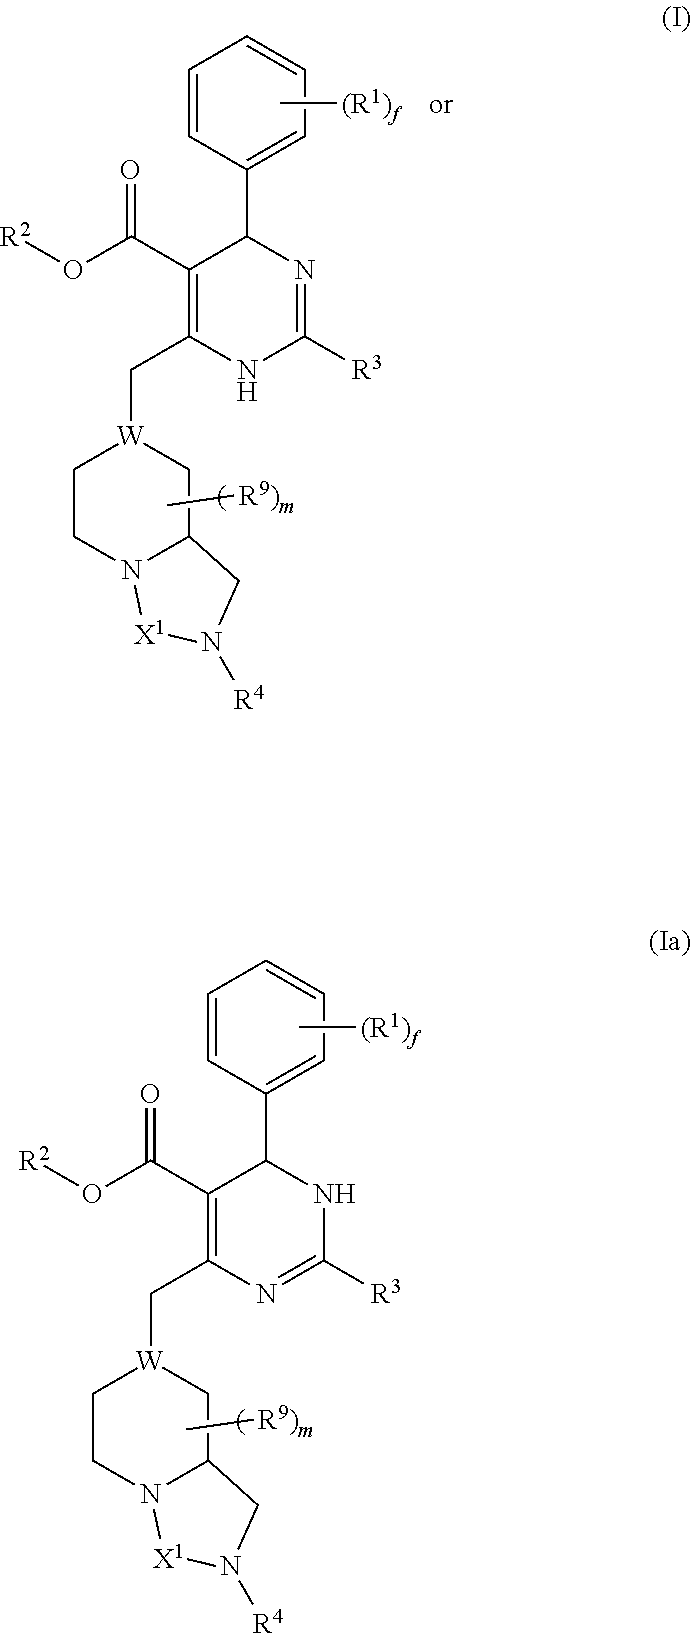 Dihydropyrimidine compounds and uses thereof in medicine